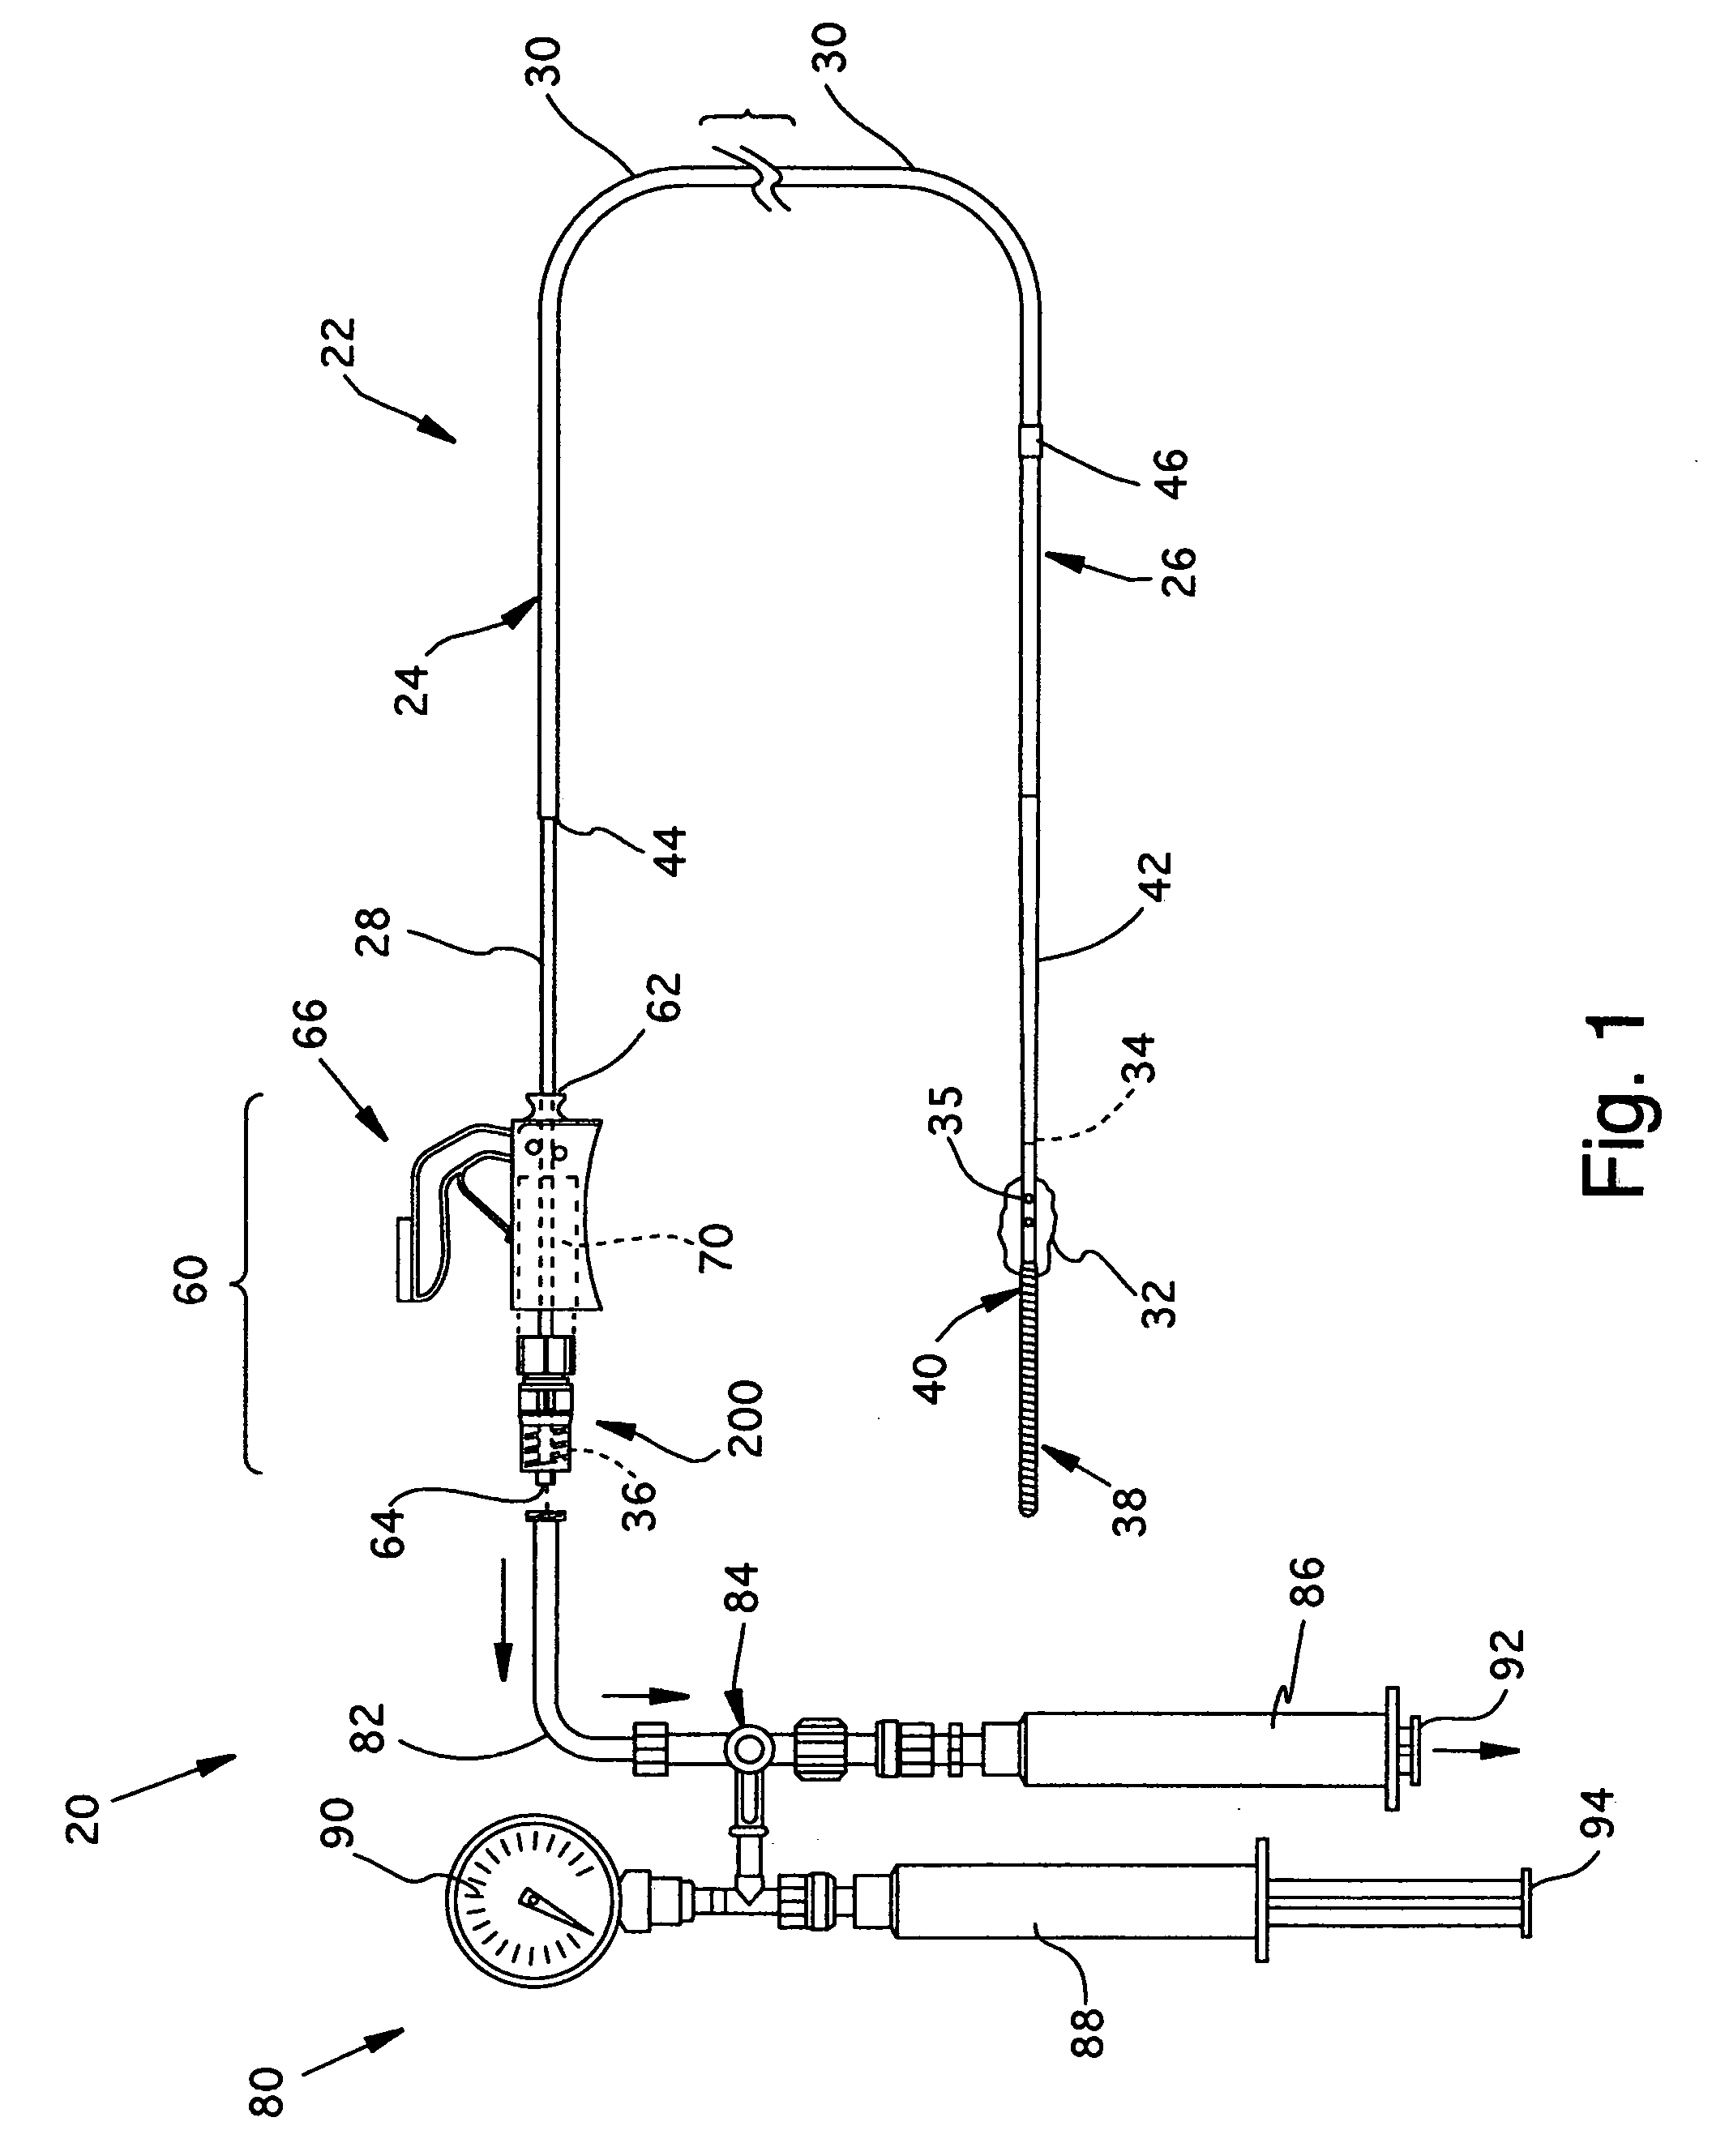 Guidewire assembly including a repeatably inflatable occlusive balloon on a guidewire ensheathed with a spiral coil